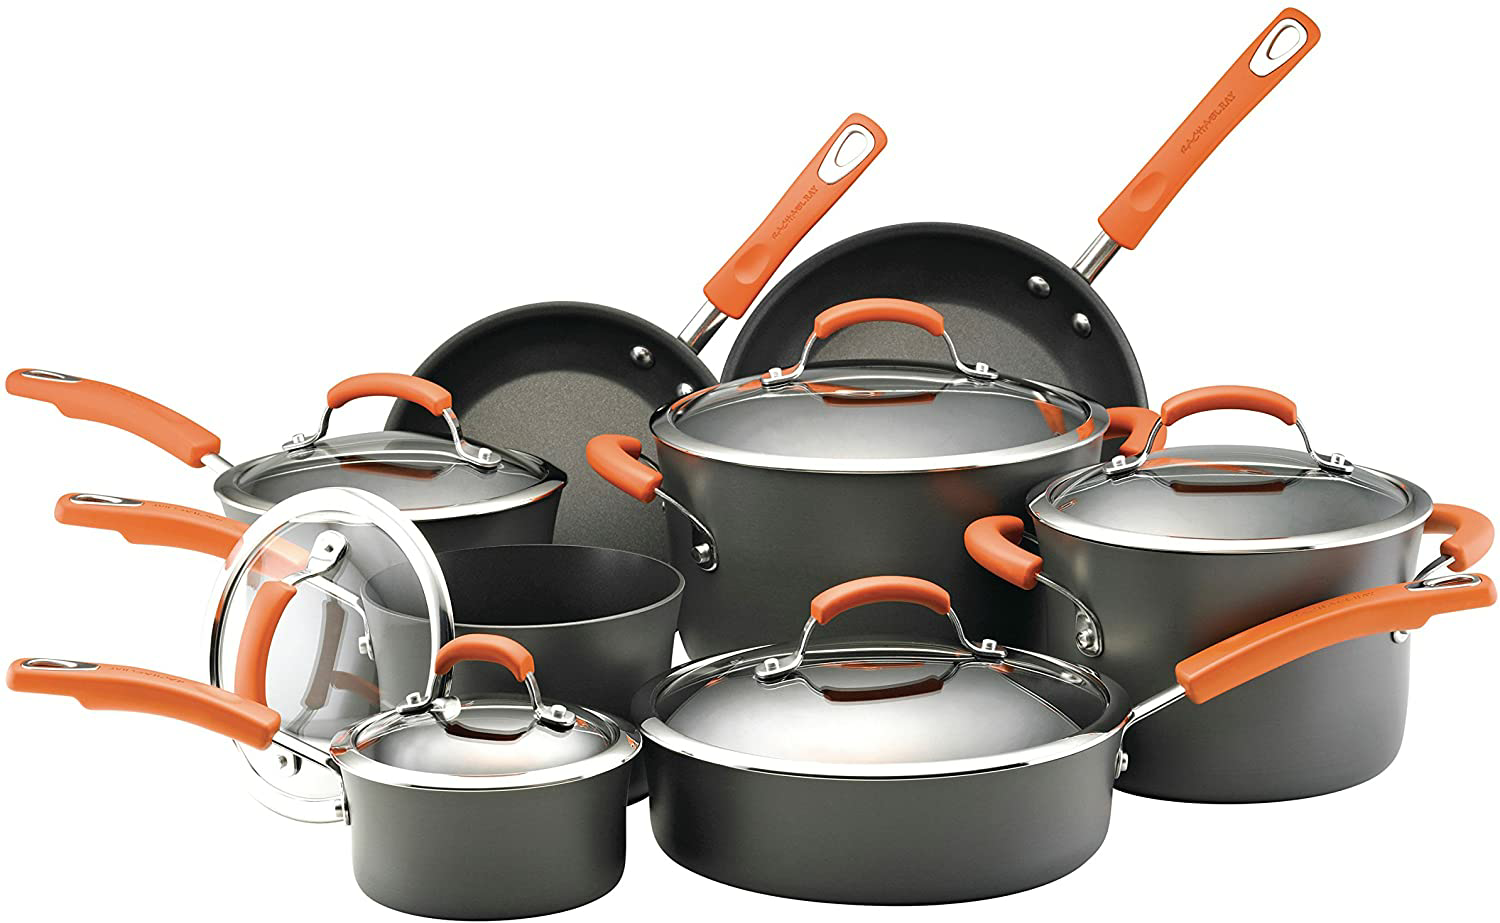 Rachael Ray Brights Hard-Anodized Nonstick Cookware Set with Glass Lids, 14-Piece Pot and Pan Set, Gray with Orange Handles $188